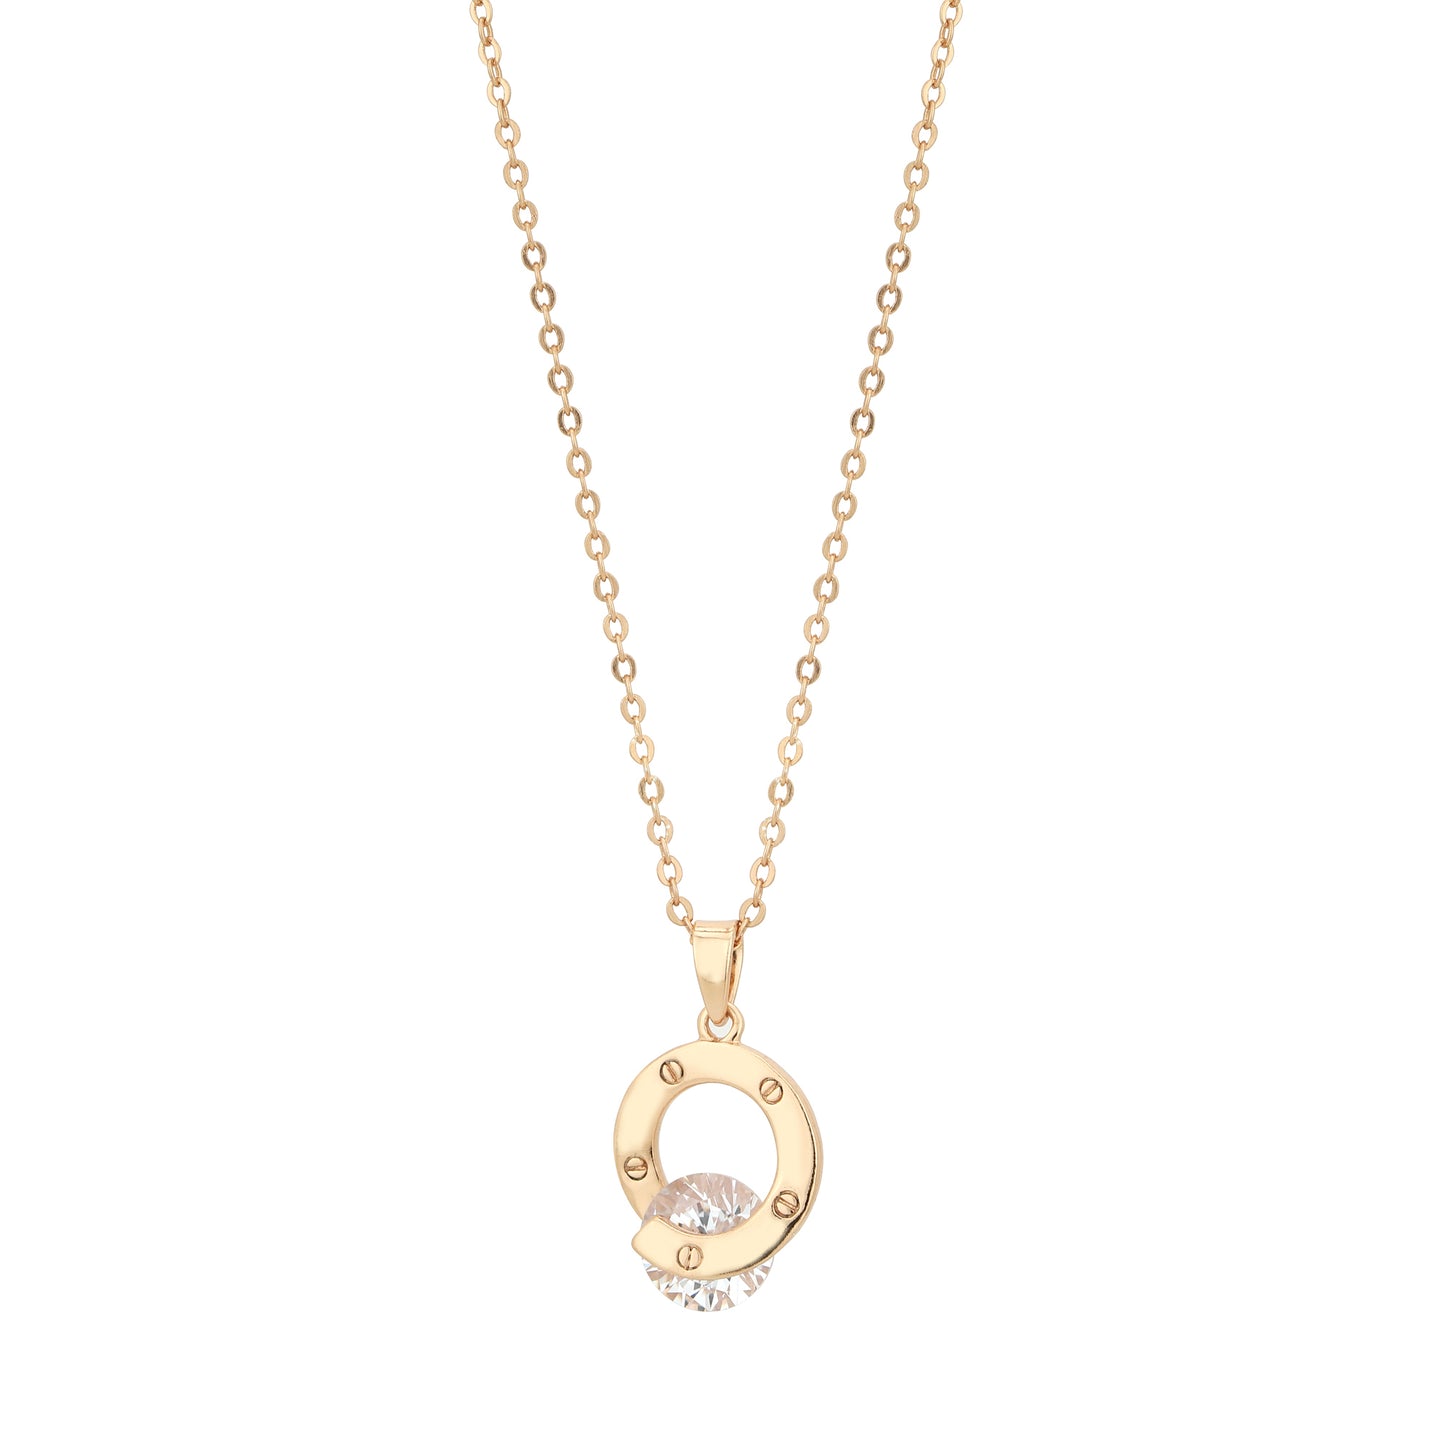 Carlton London Rose Gold Pendant Charm Necklace with Round Stone